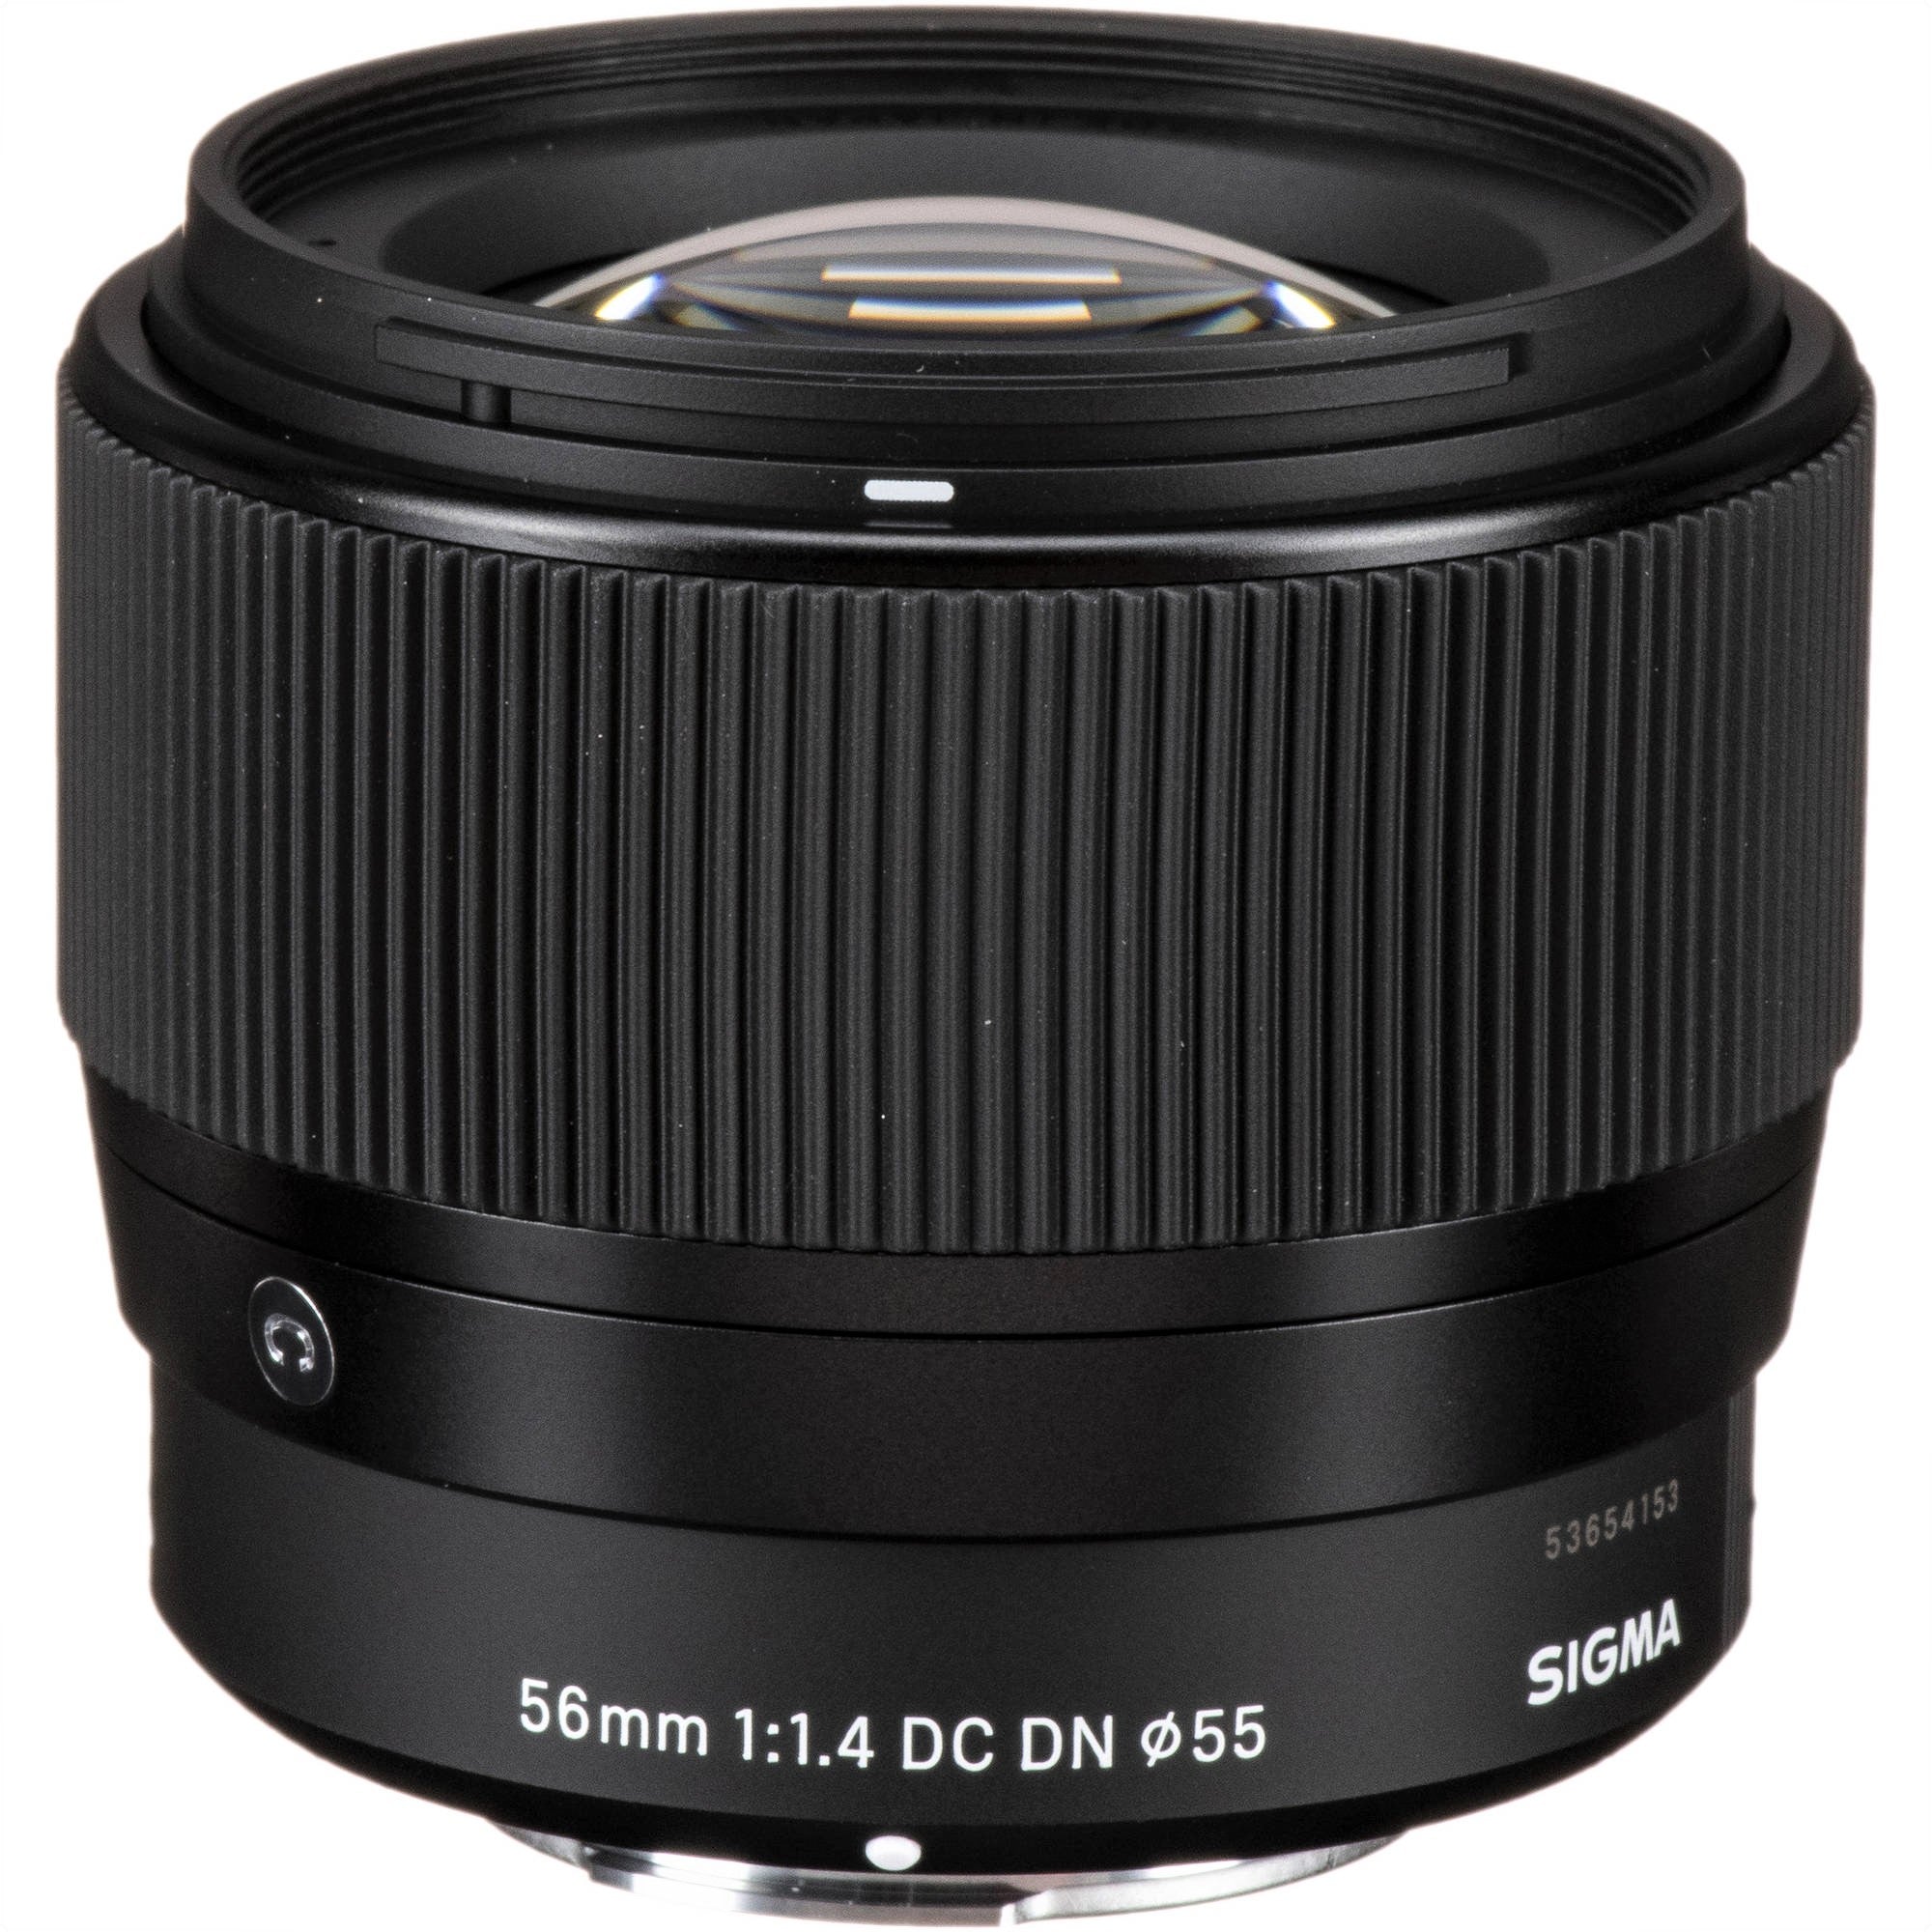 Sigma 56mm F1.4 DC DN | C for Micro 4/3